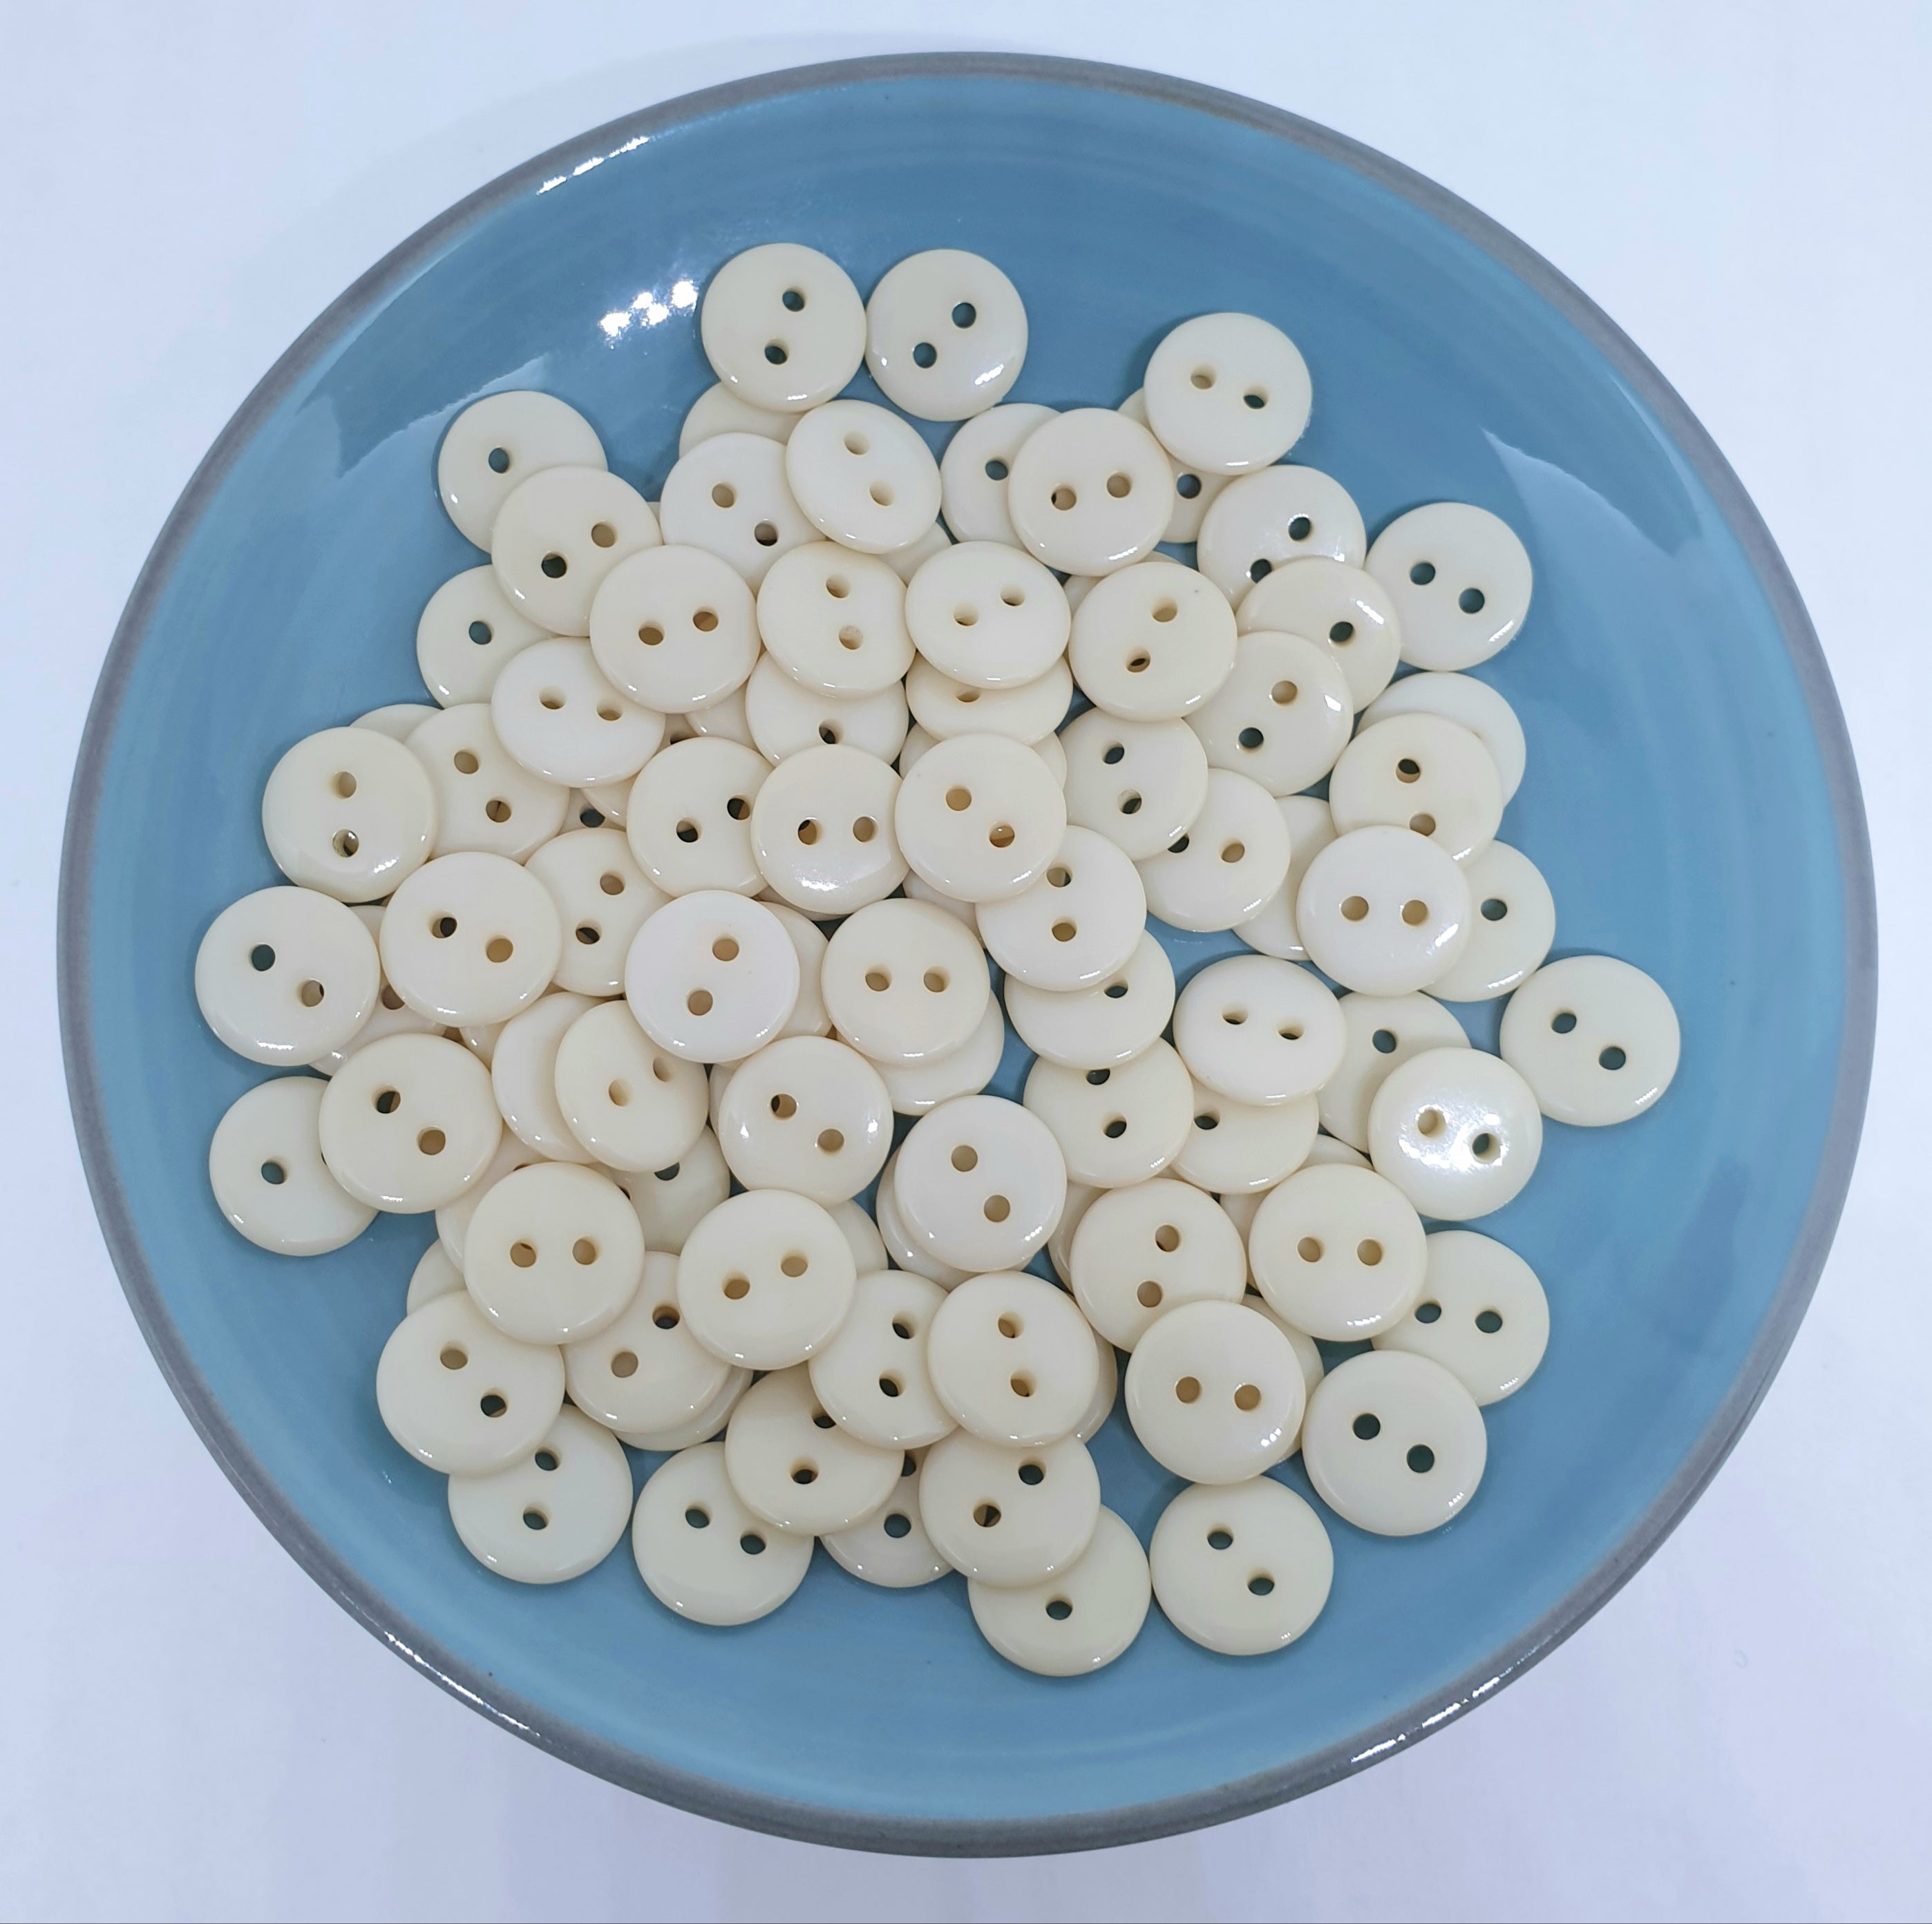 MajorCrafts 120pcs 10mm Cream 2 Holes Small Round Resin Sewing Buttons B23